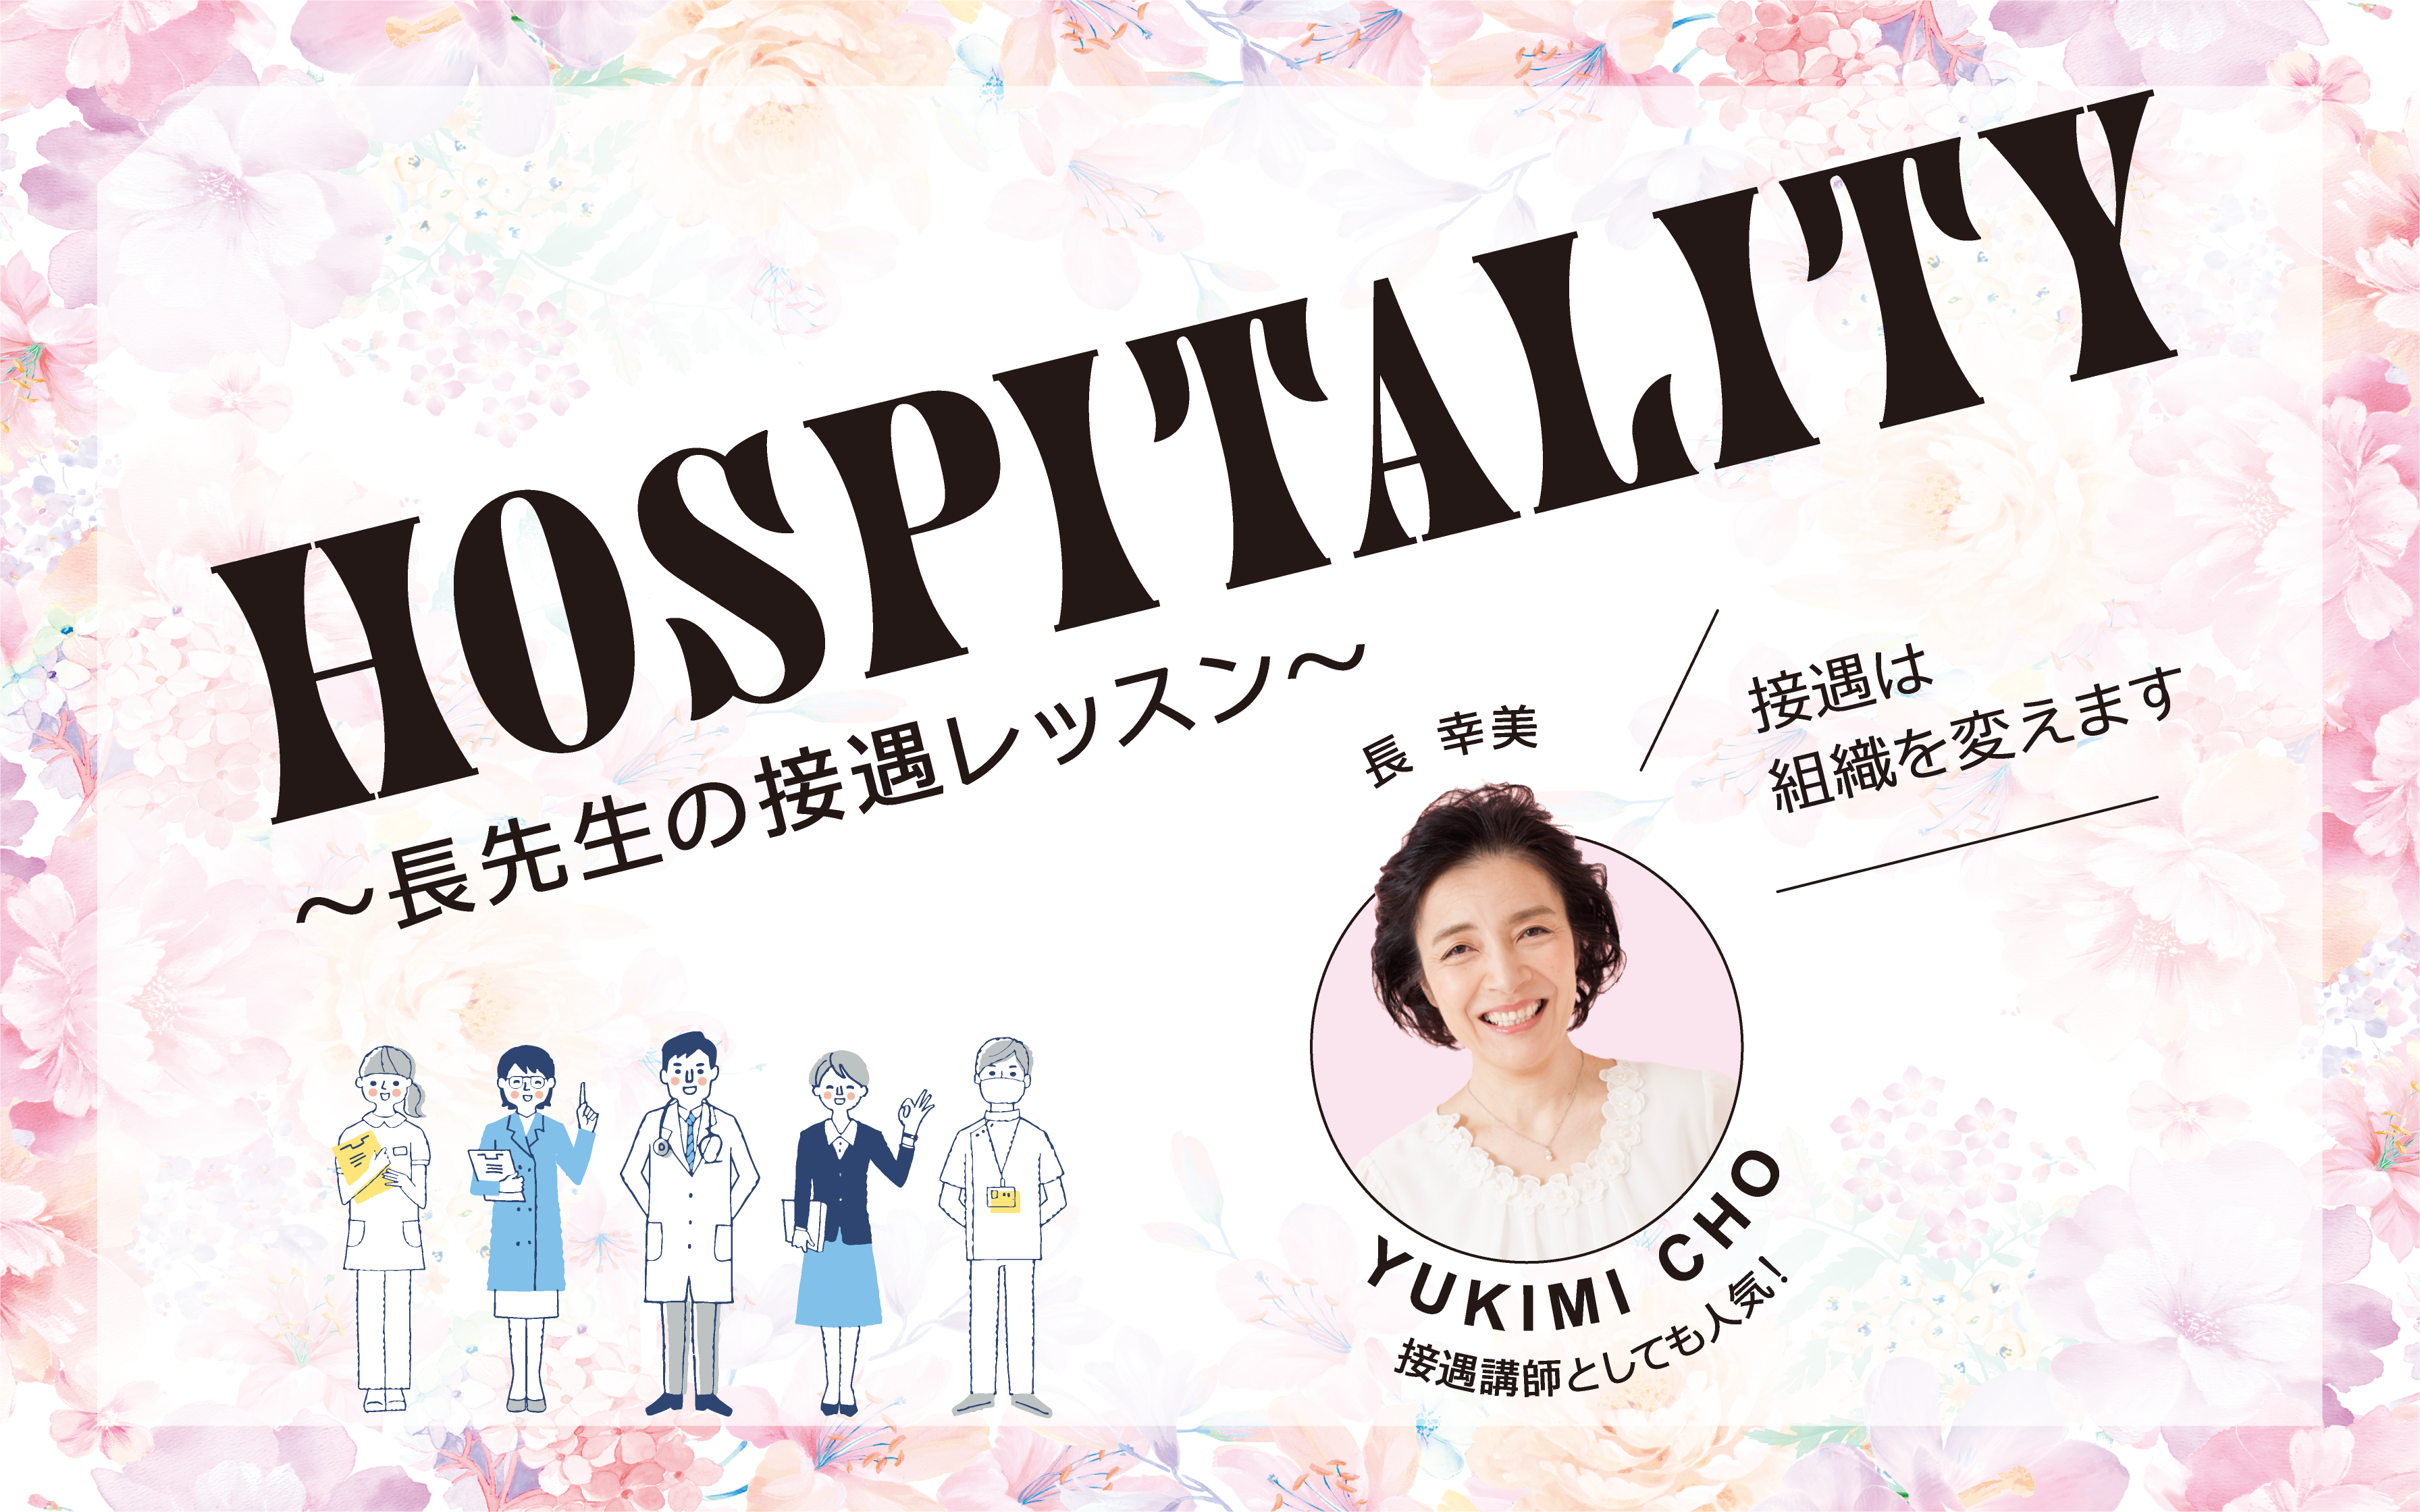 You are currently viewing HOSPITALITY 〜長先生の接遇レッスン〜 VOL.26　SNSの活用とマナー〜見ず知らずの方に発信する〜